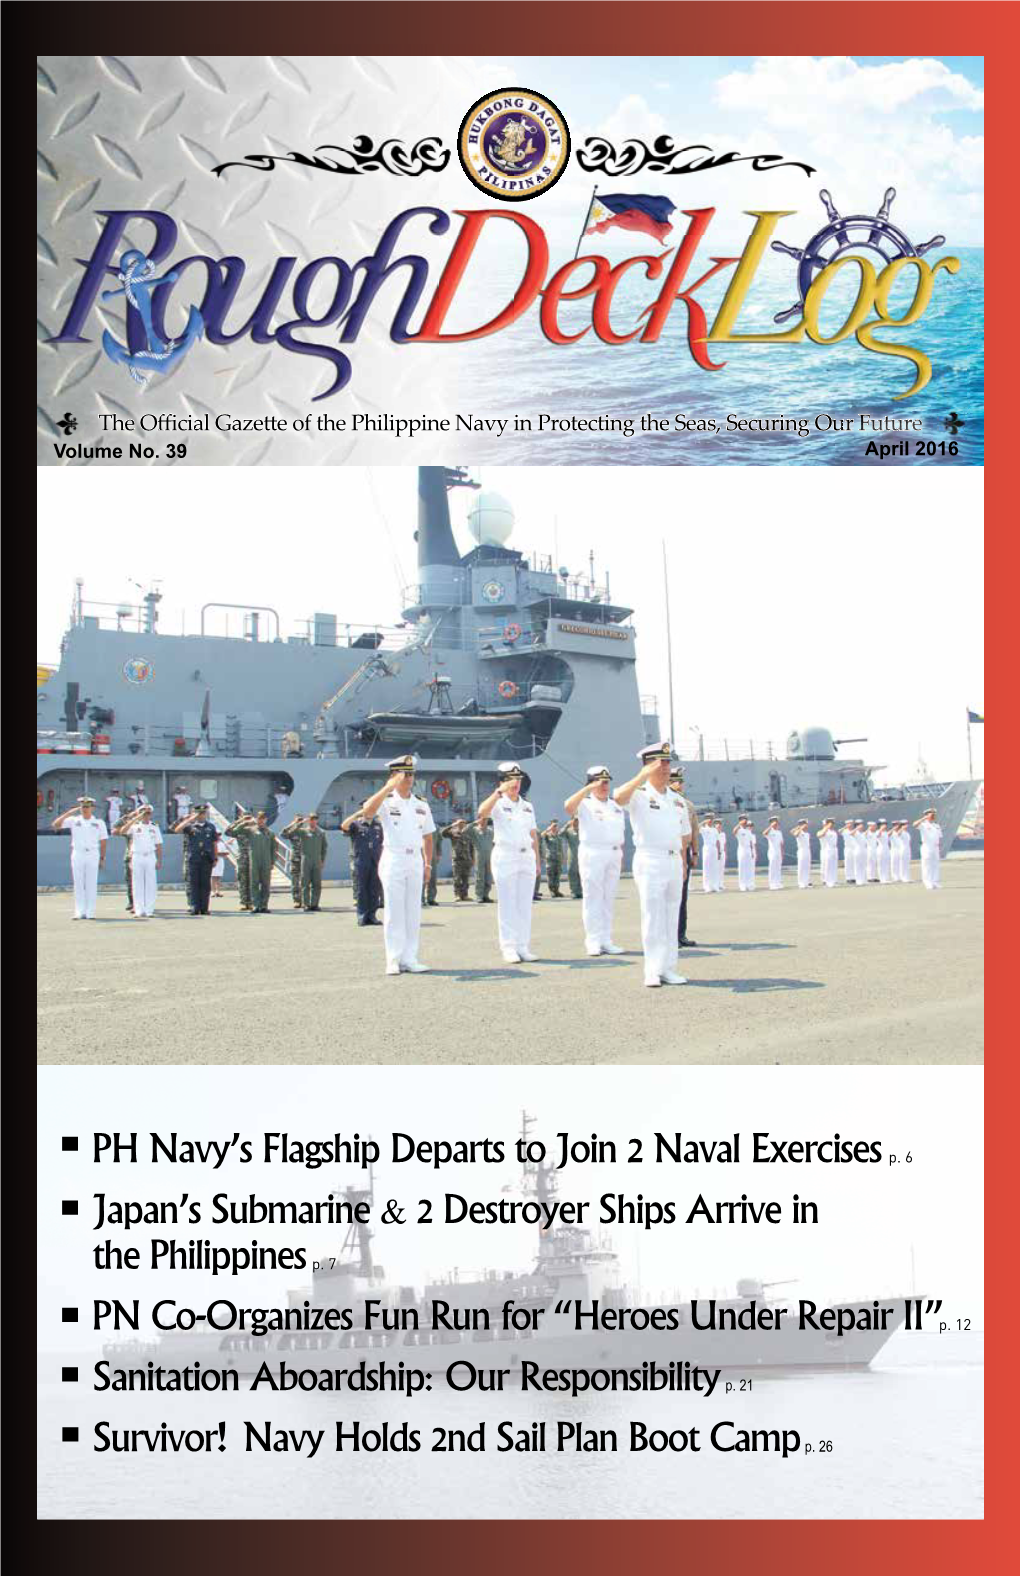 PH Navy's Flagship Departs to Join 2 Naval